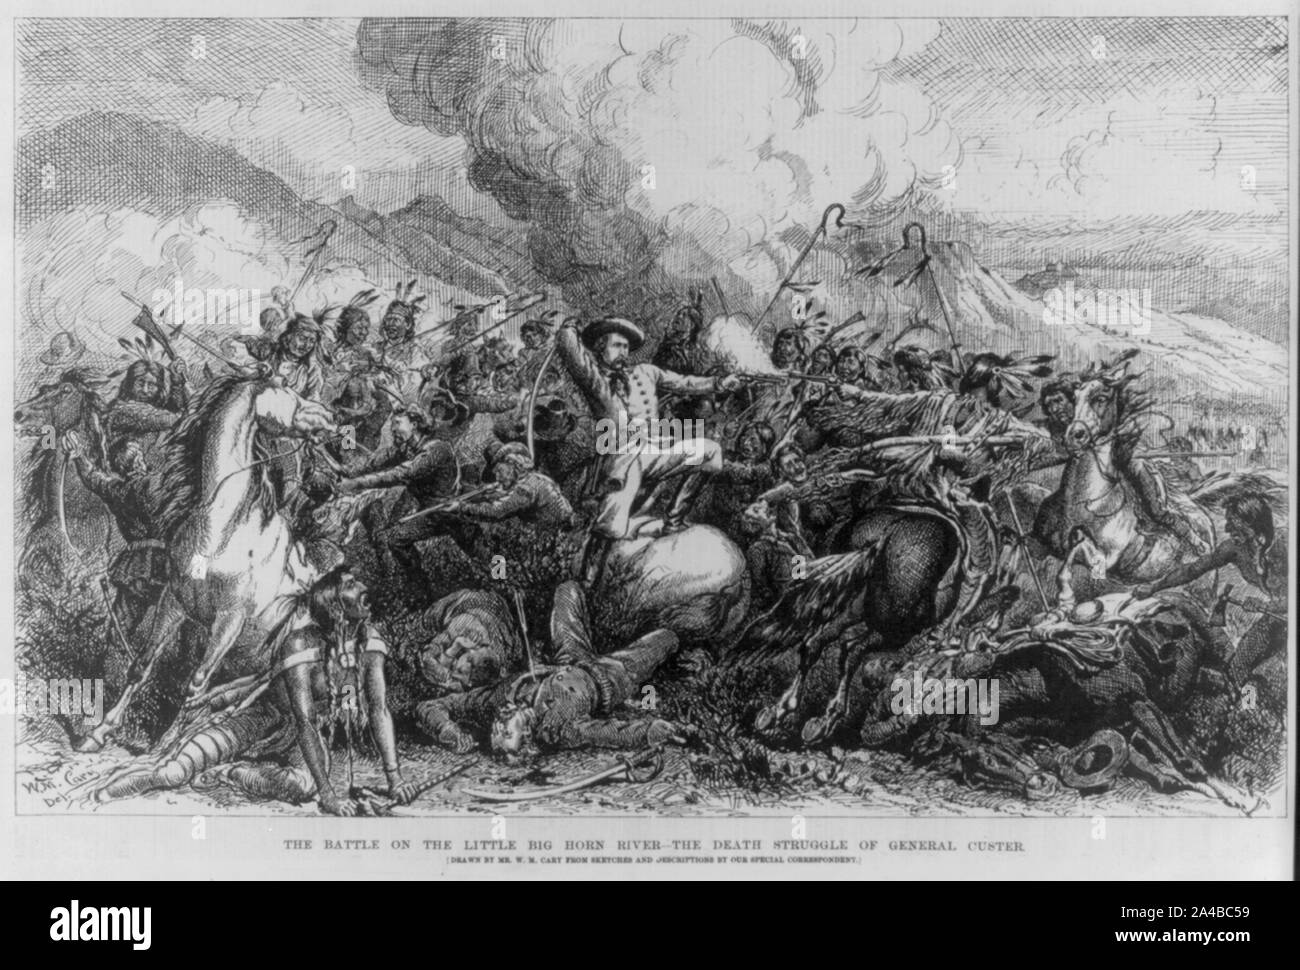 The Battle on the Little Big Horn River - The Death Struggle of General Custer Stock Photo